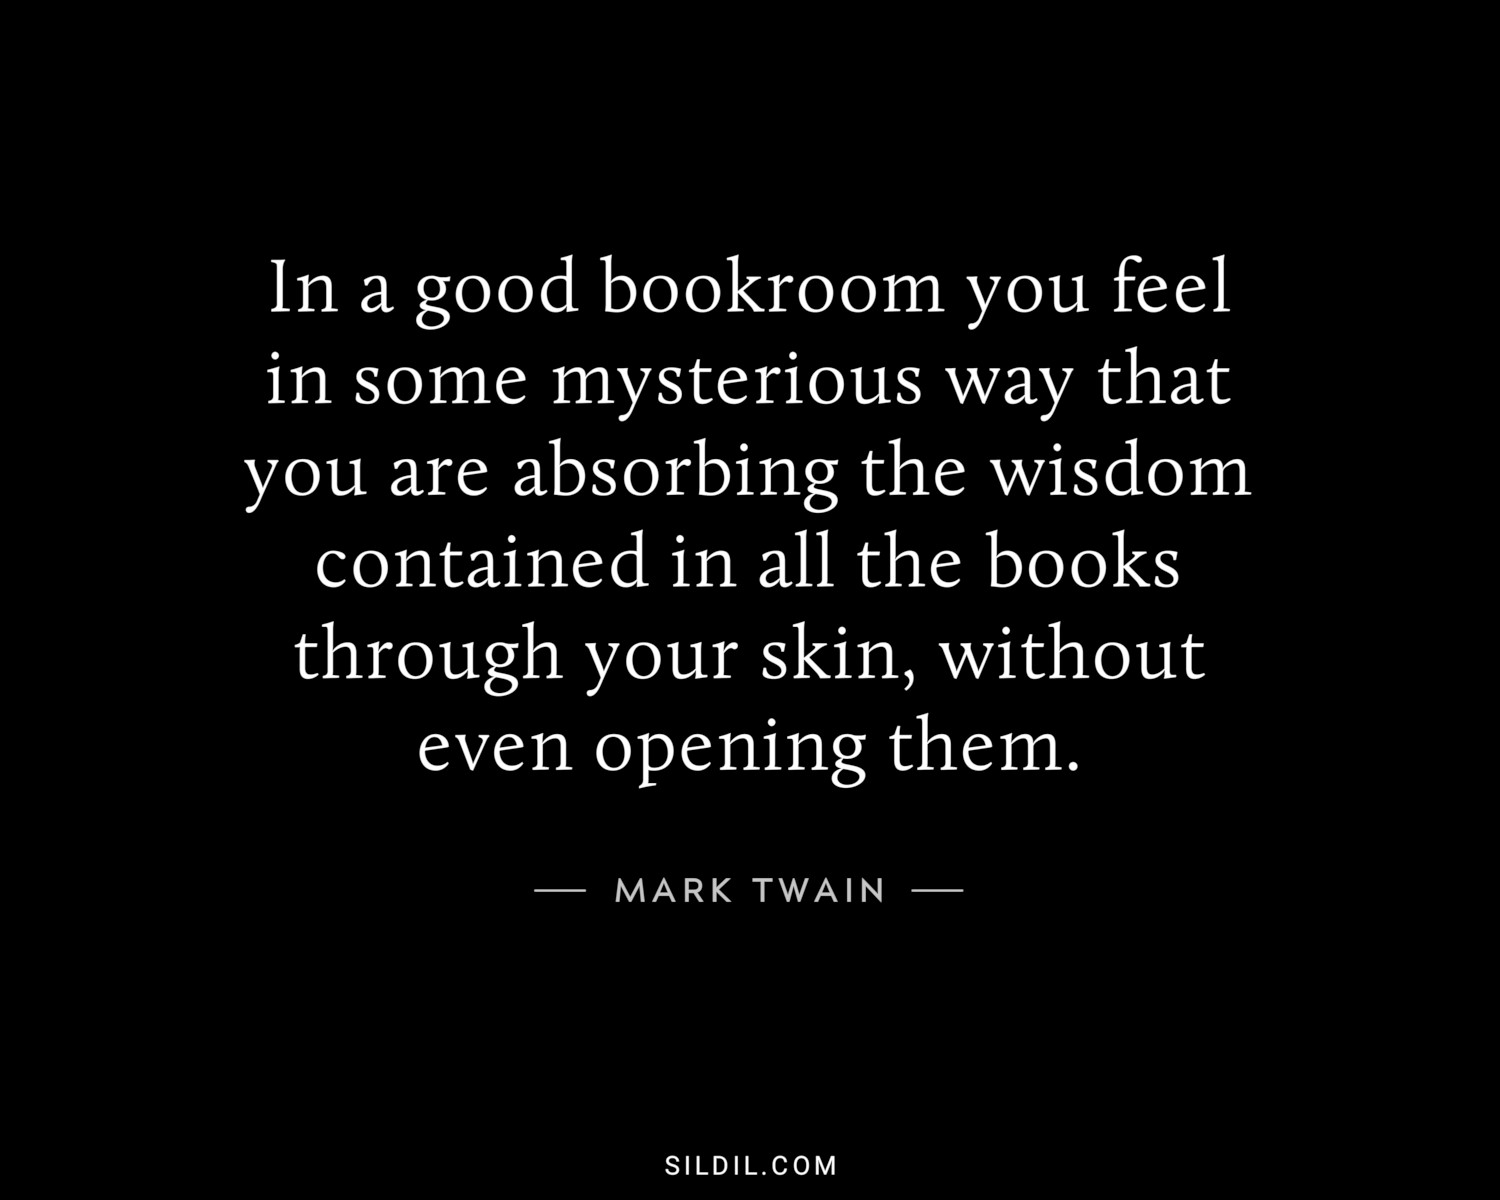 In a good bookroom you feel in some mysterious way that you are absorbing the wisdom contained in all the books through your skin, without even opening them.